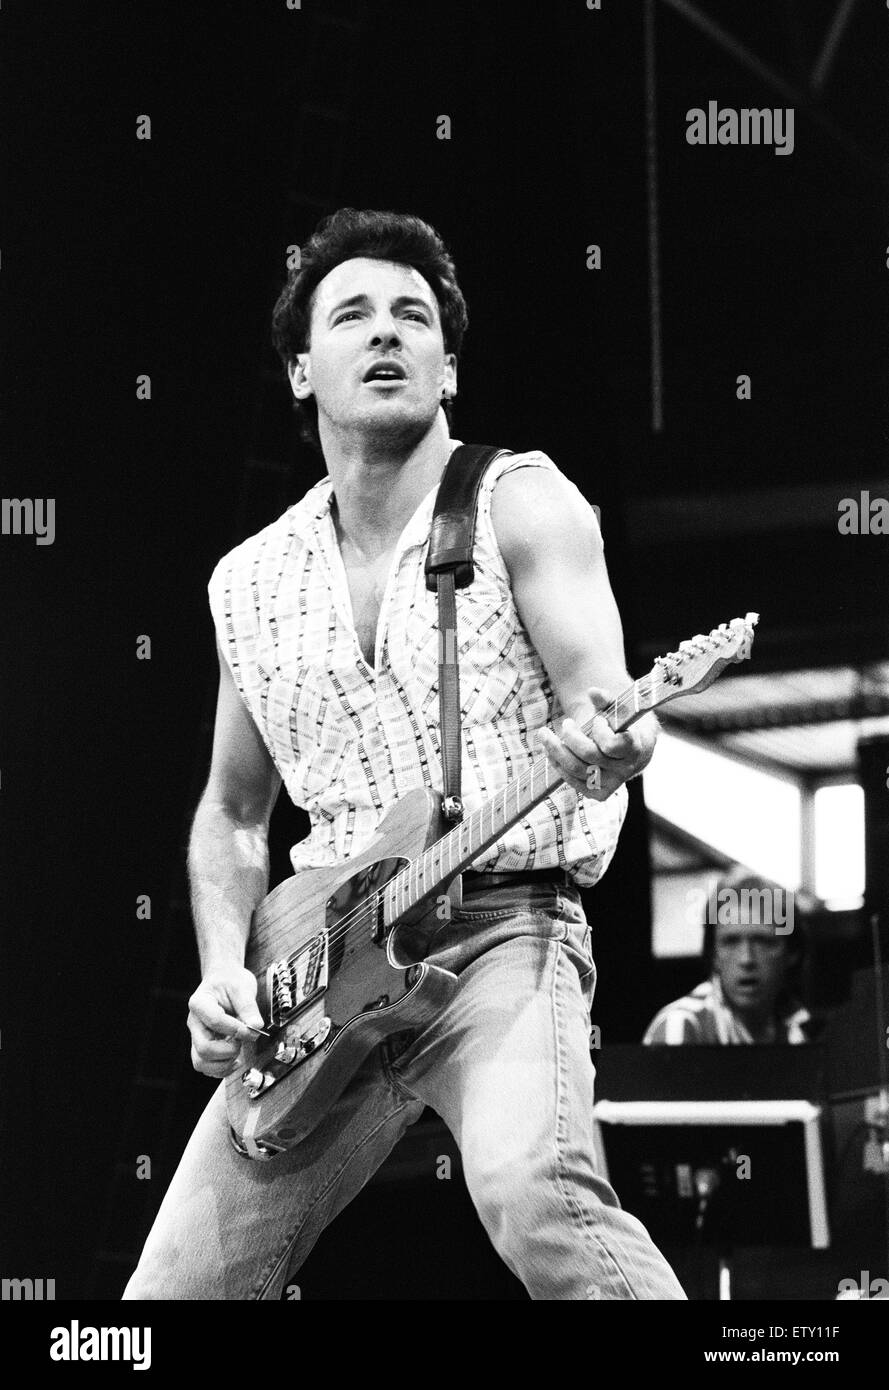 Bruce Springsteen in concert at Wembley, London, 3rd July 1985. Stock Photo